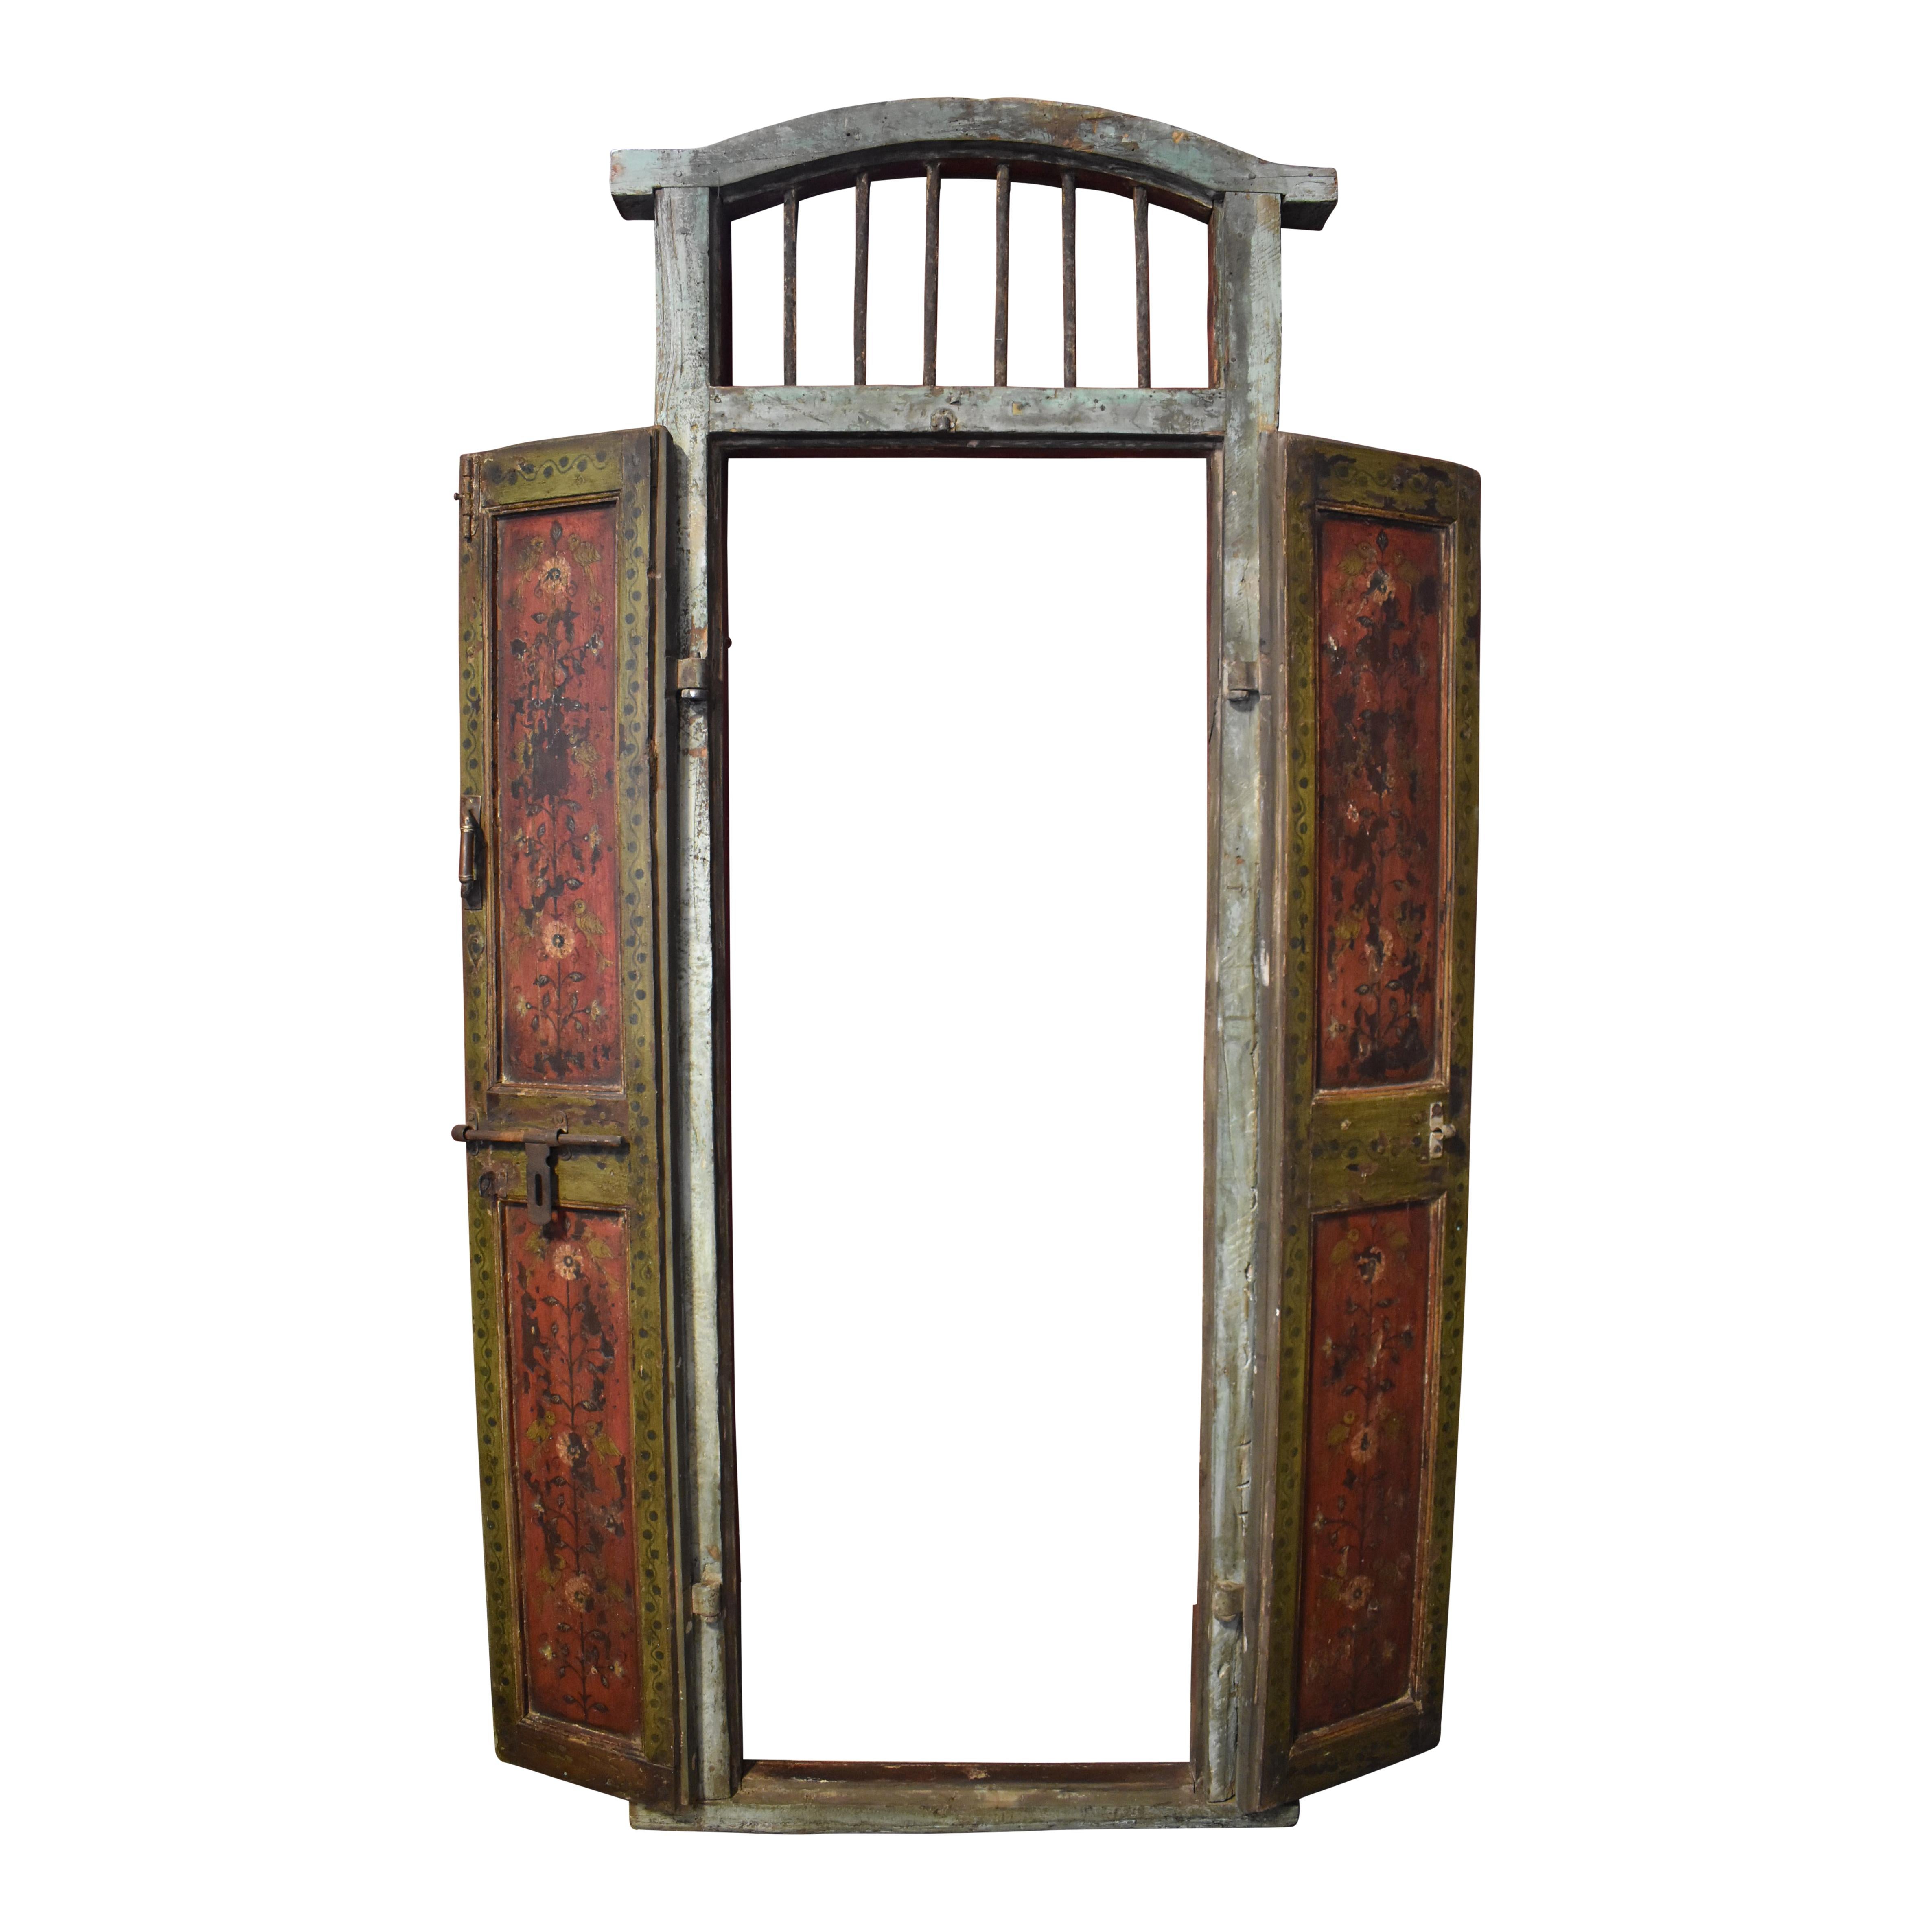 Hand-painted in the folk art style that is typical of the Northern European area of the Netherlands and Belgium, these charming doors in their original frame feature a floral and fowl motif. A framed arched transom with six vertical spindles crowns